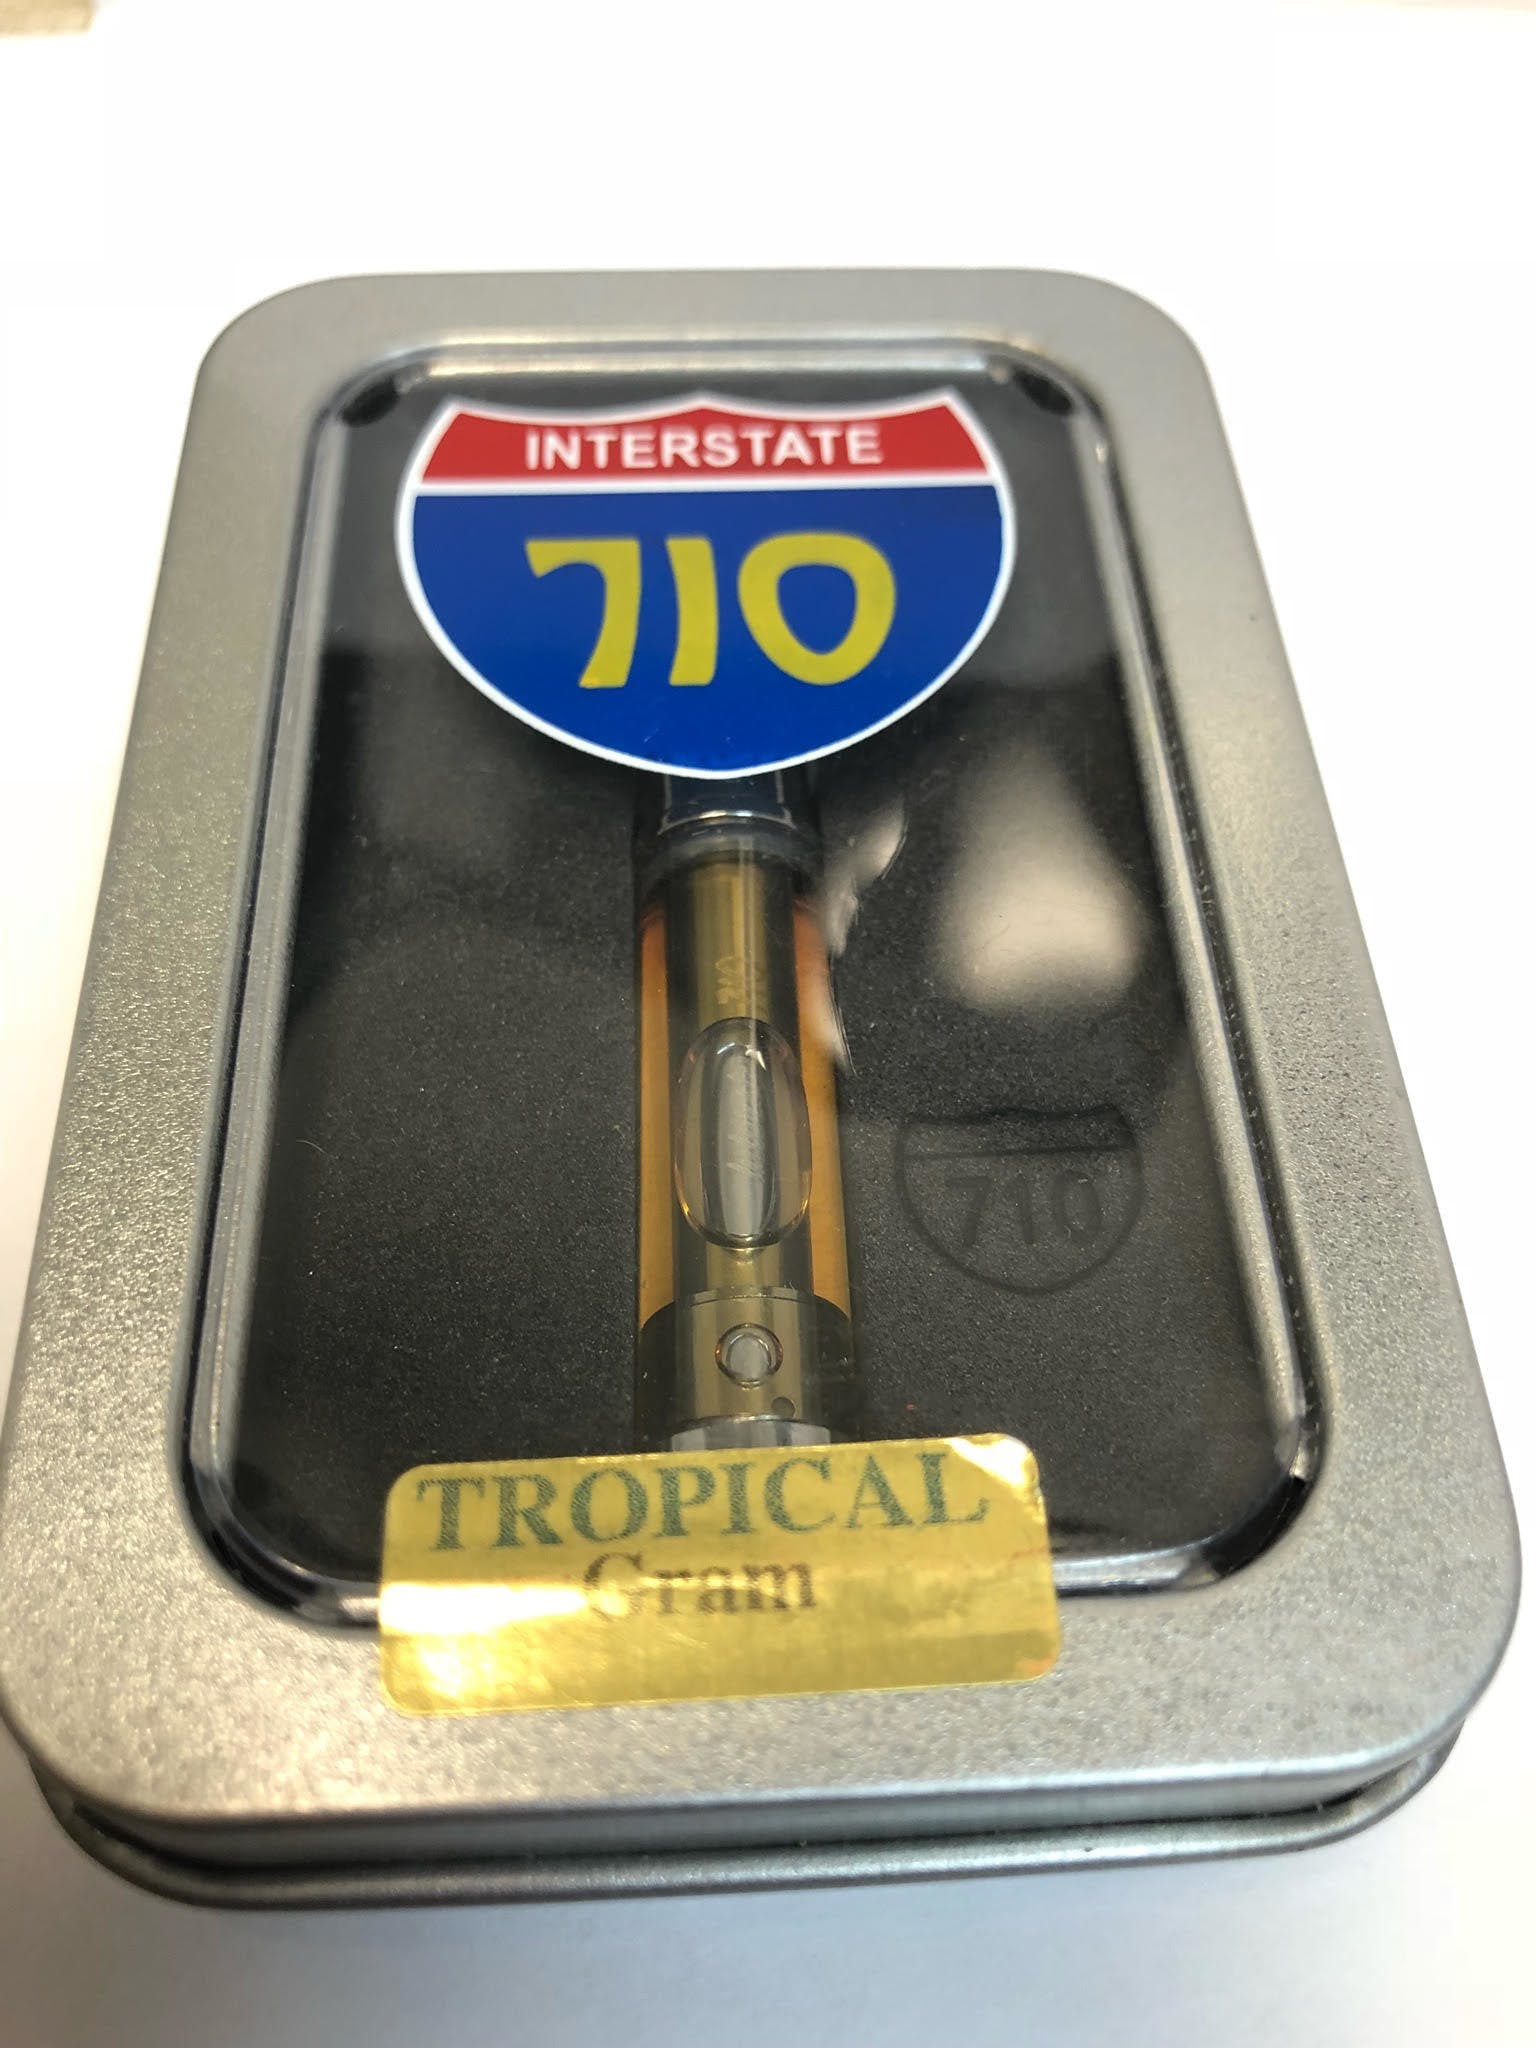 concentrate-710-interstate-cannabinoids-tropical